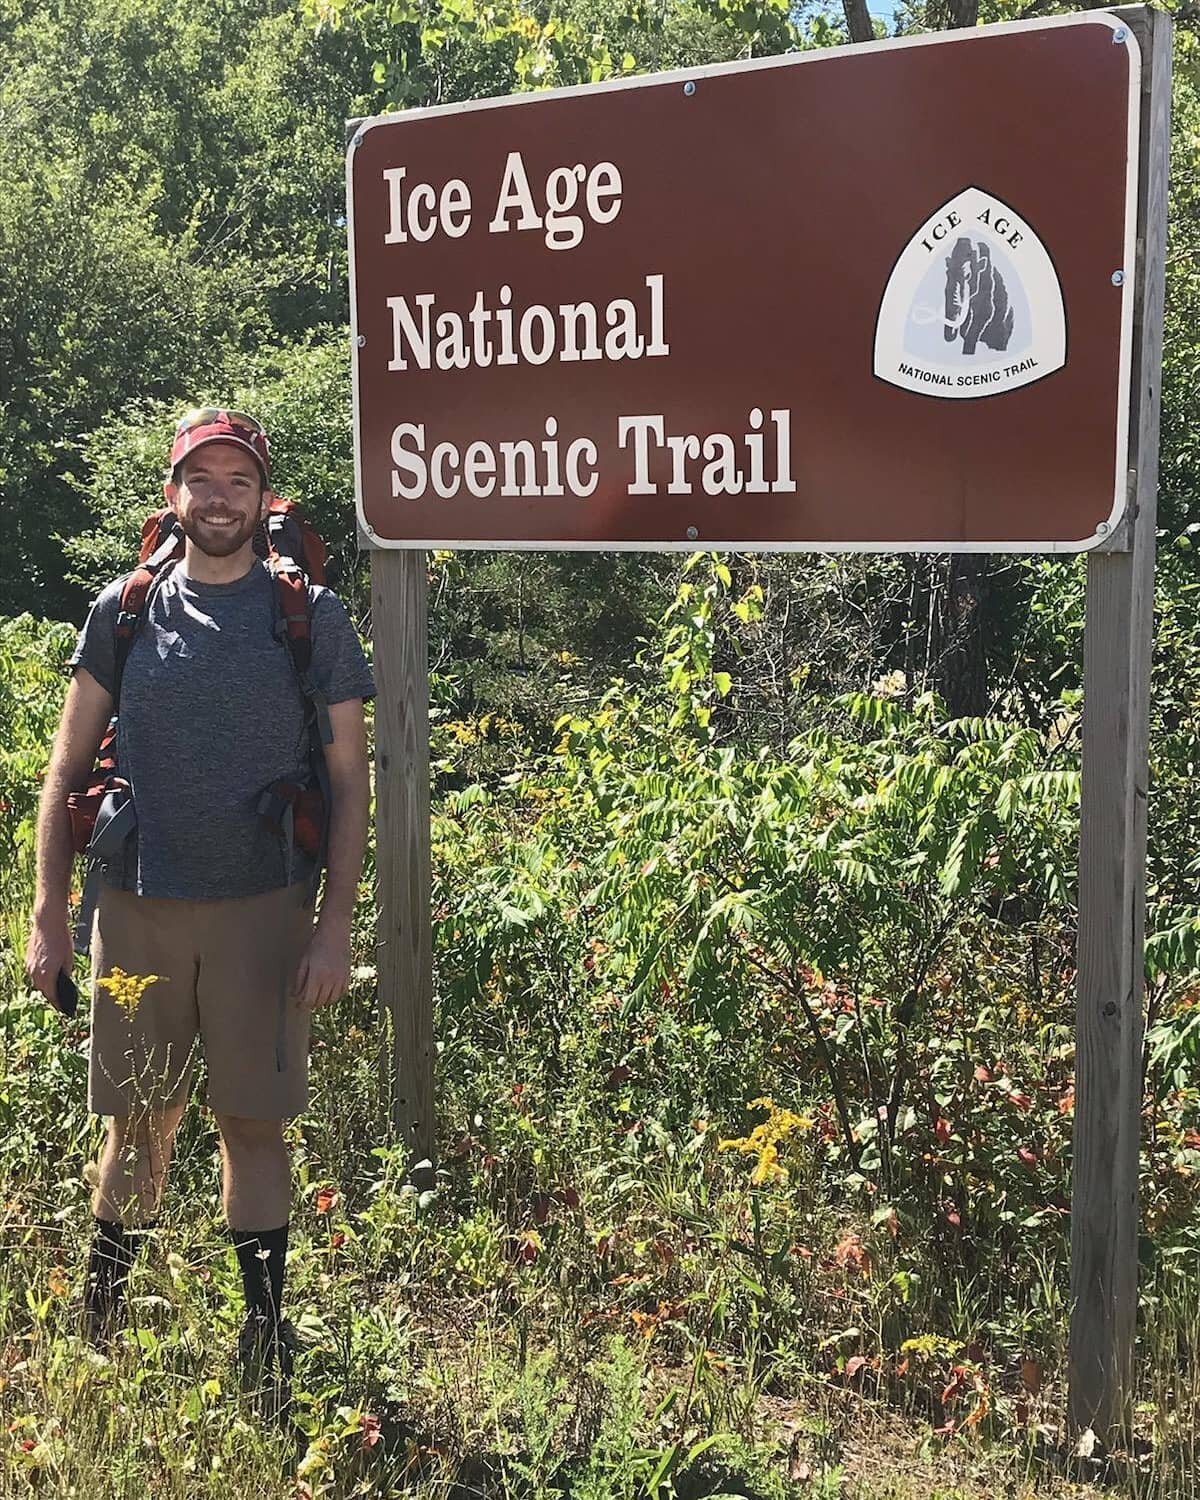 Hike Forrest Hike!

With all the bike events canceled this year, it has presented to me the opportunity to finally do something I've always wanted to do. I took myself hiking through the Northern Unit of the Kettle Moraine State Forest.

3 days of pe